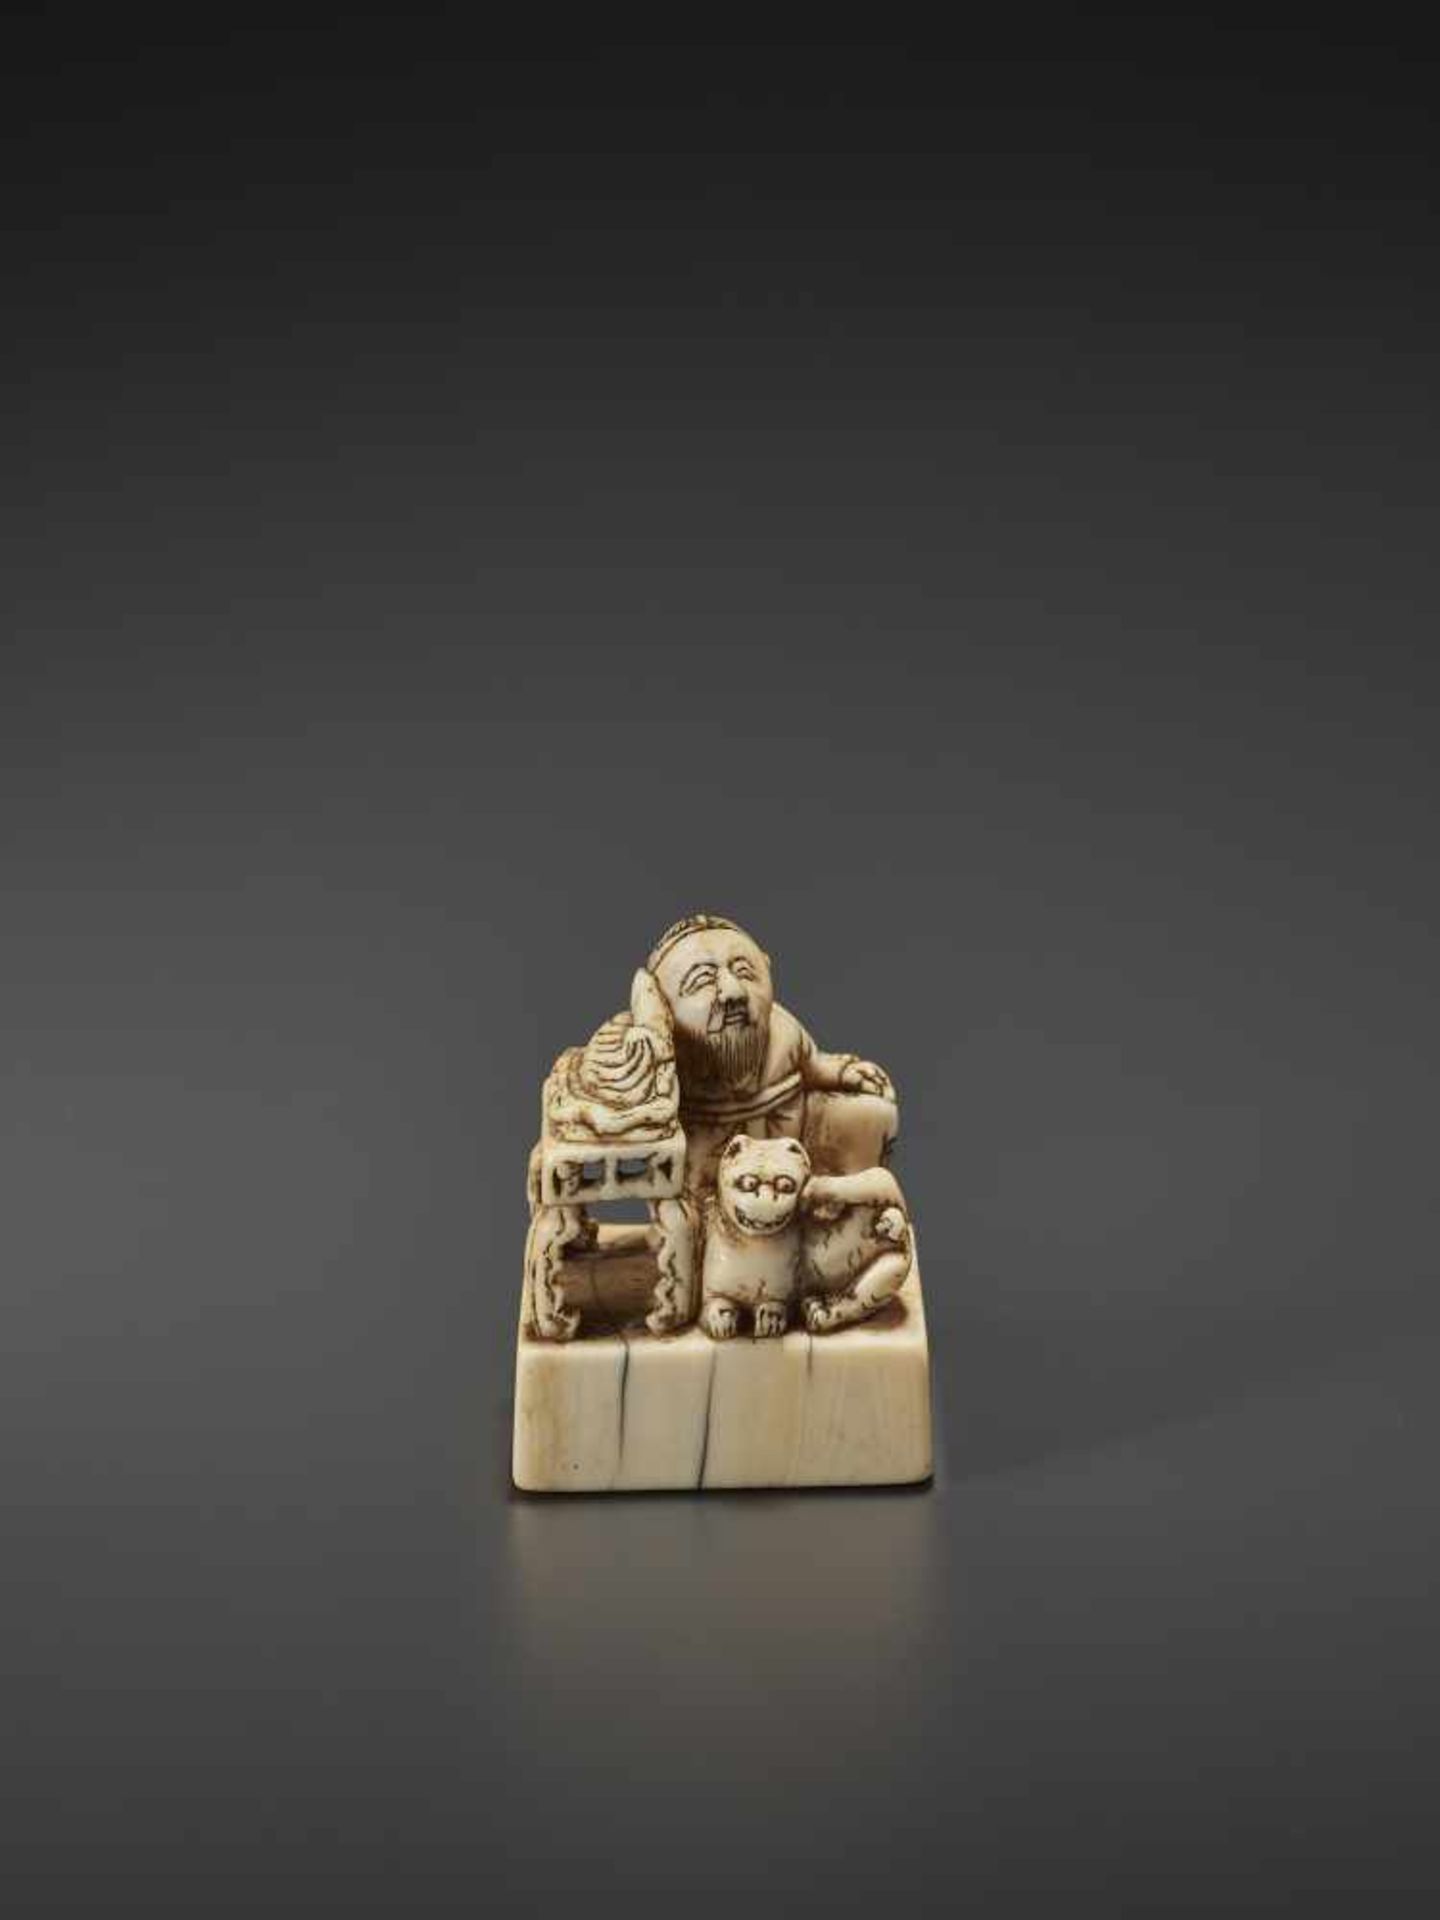 AN UNUSUAL AND EARLY IVORY NETSUKE OF A CHINESE SAGE WITH TIGER Unsigned, ivory netsukeJapan, 18th - Image 7 of 9